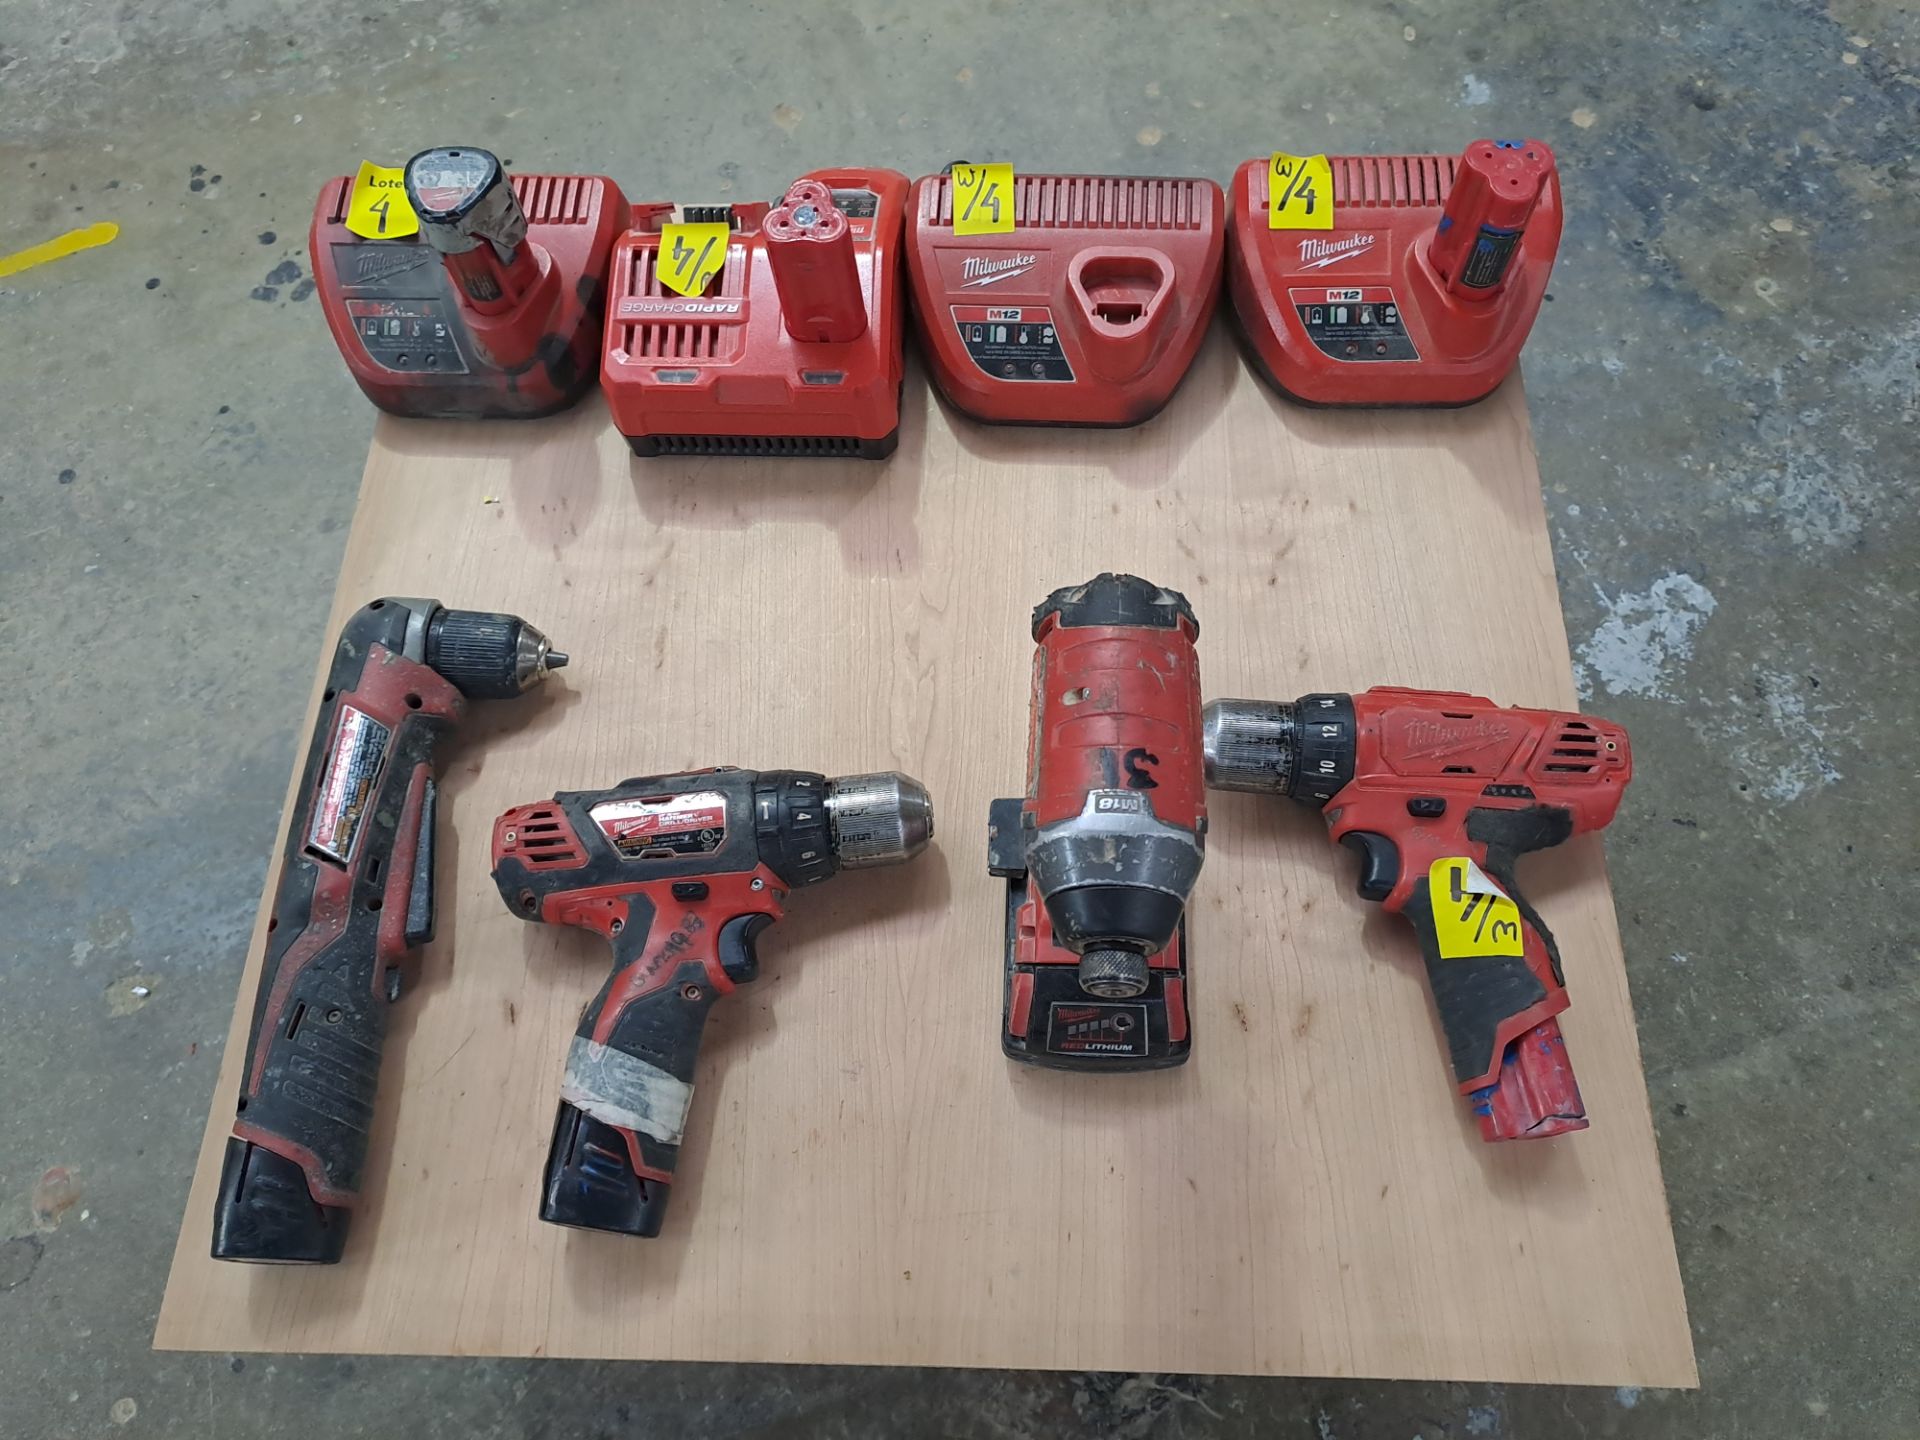 Lot of 4 pieces contains: 2 Milwaukee cordless drills (includes 2 chargers and 1 extra battery); 1